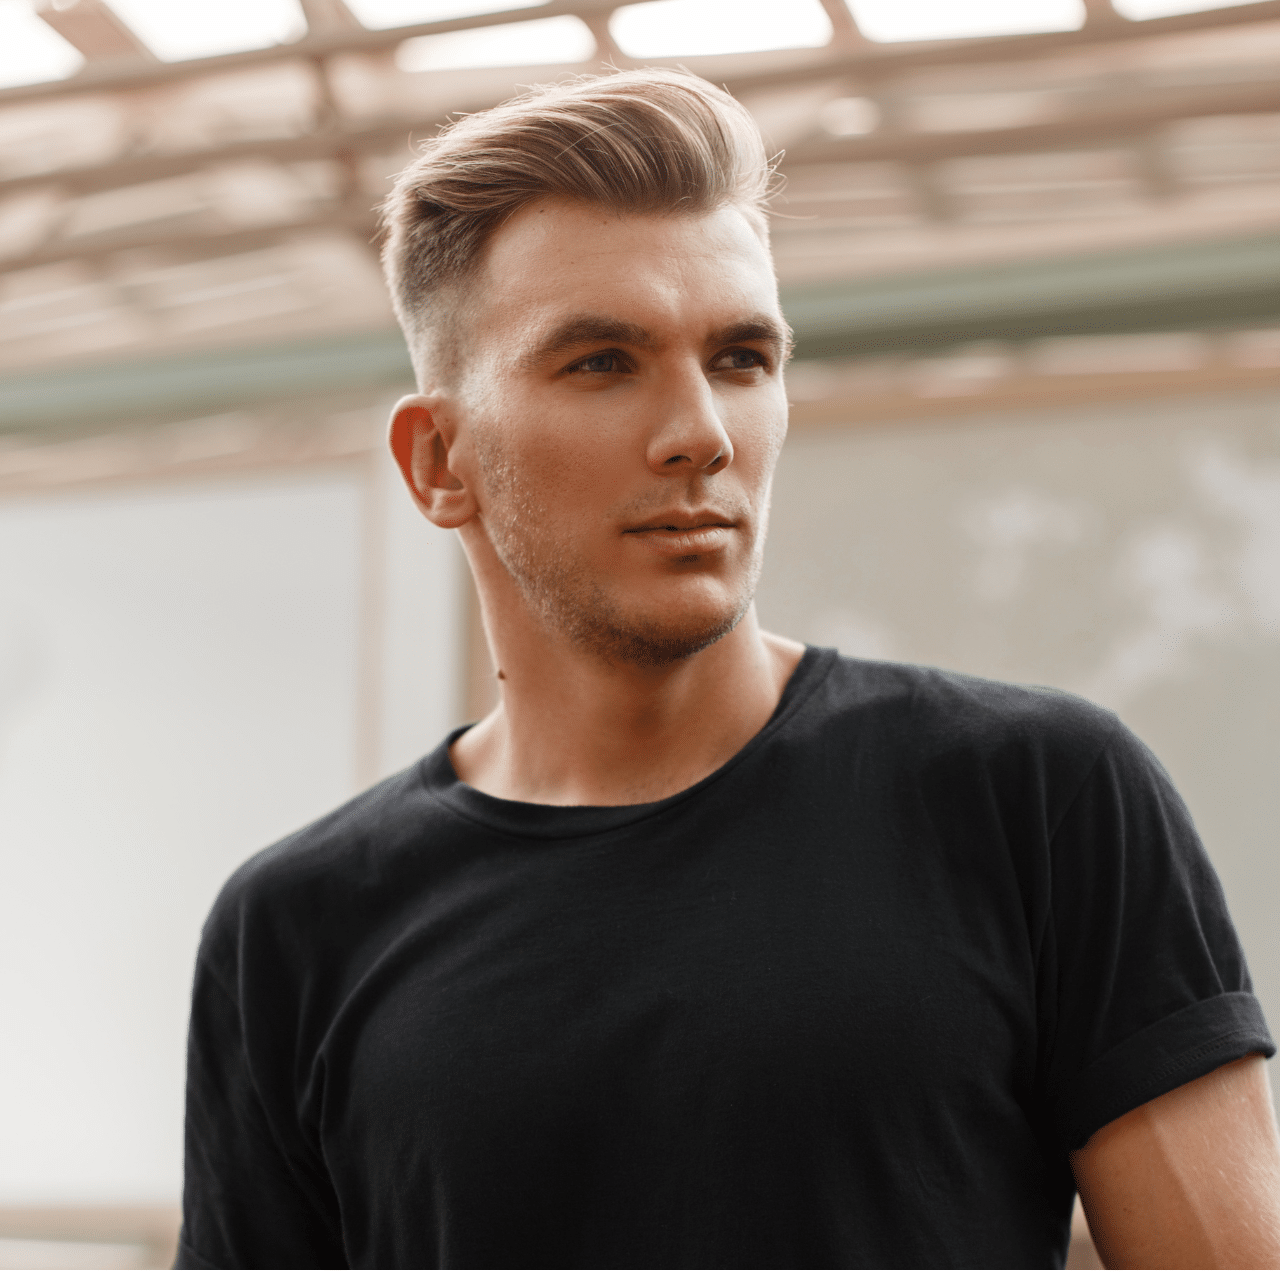 THE QUIFF HAIRSTYLE: WHAT IT IS & HOW TO STYLE IT